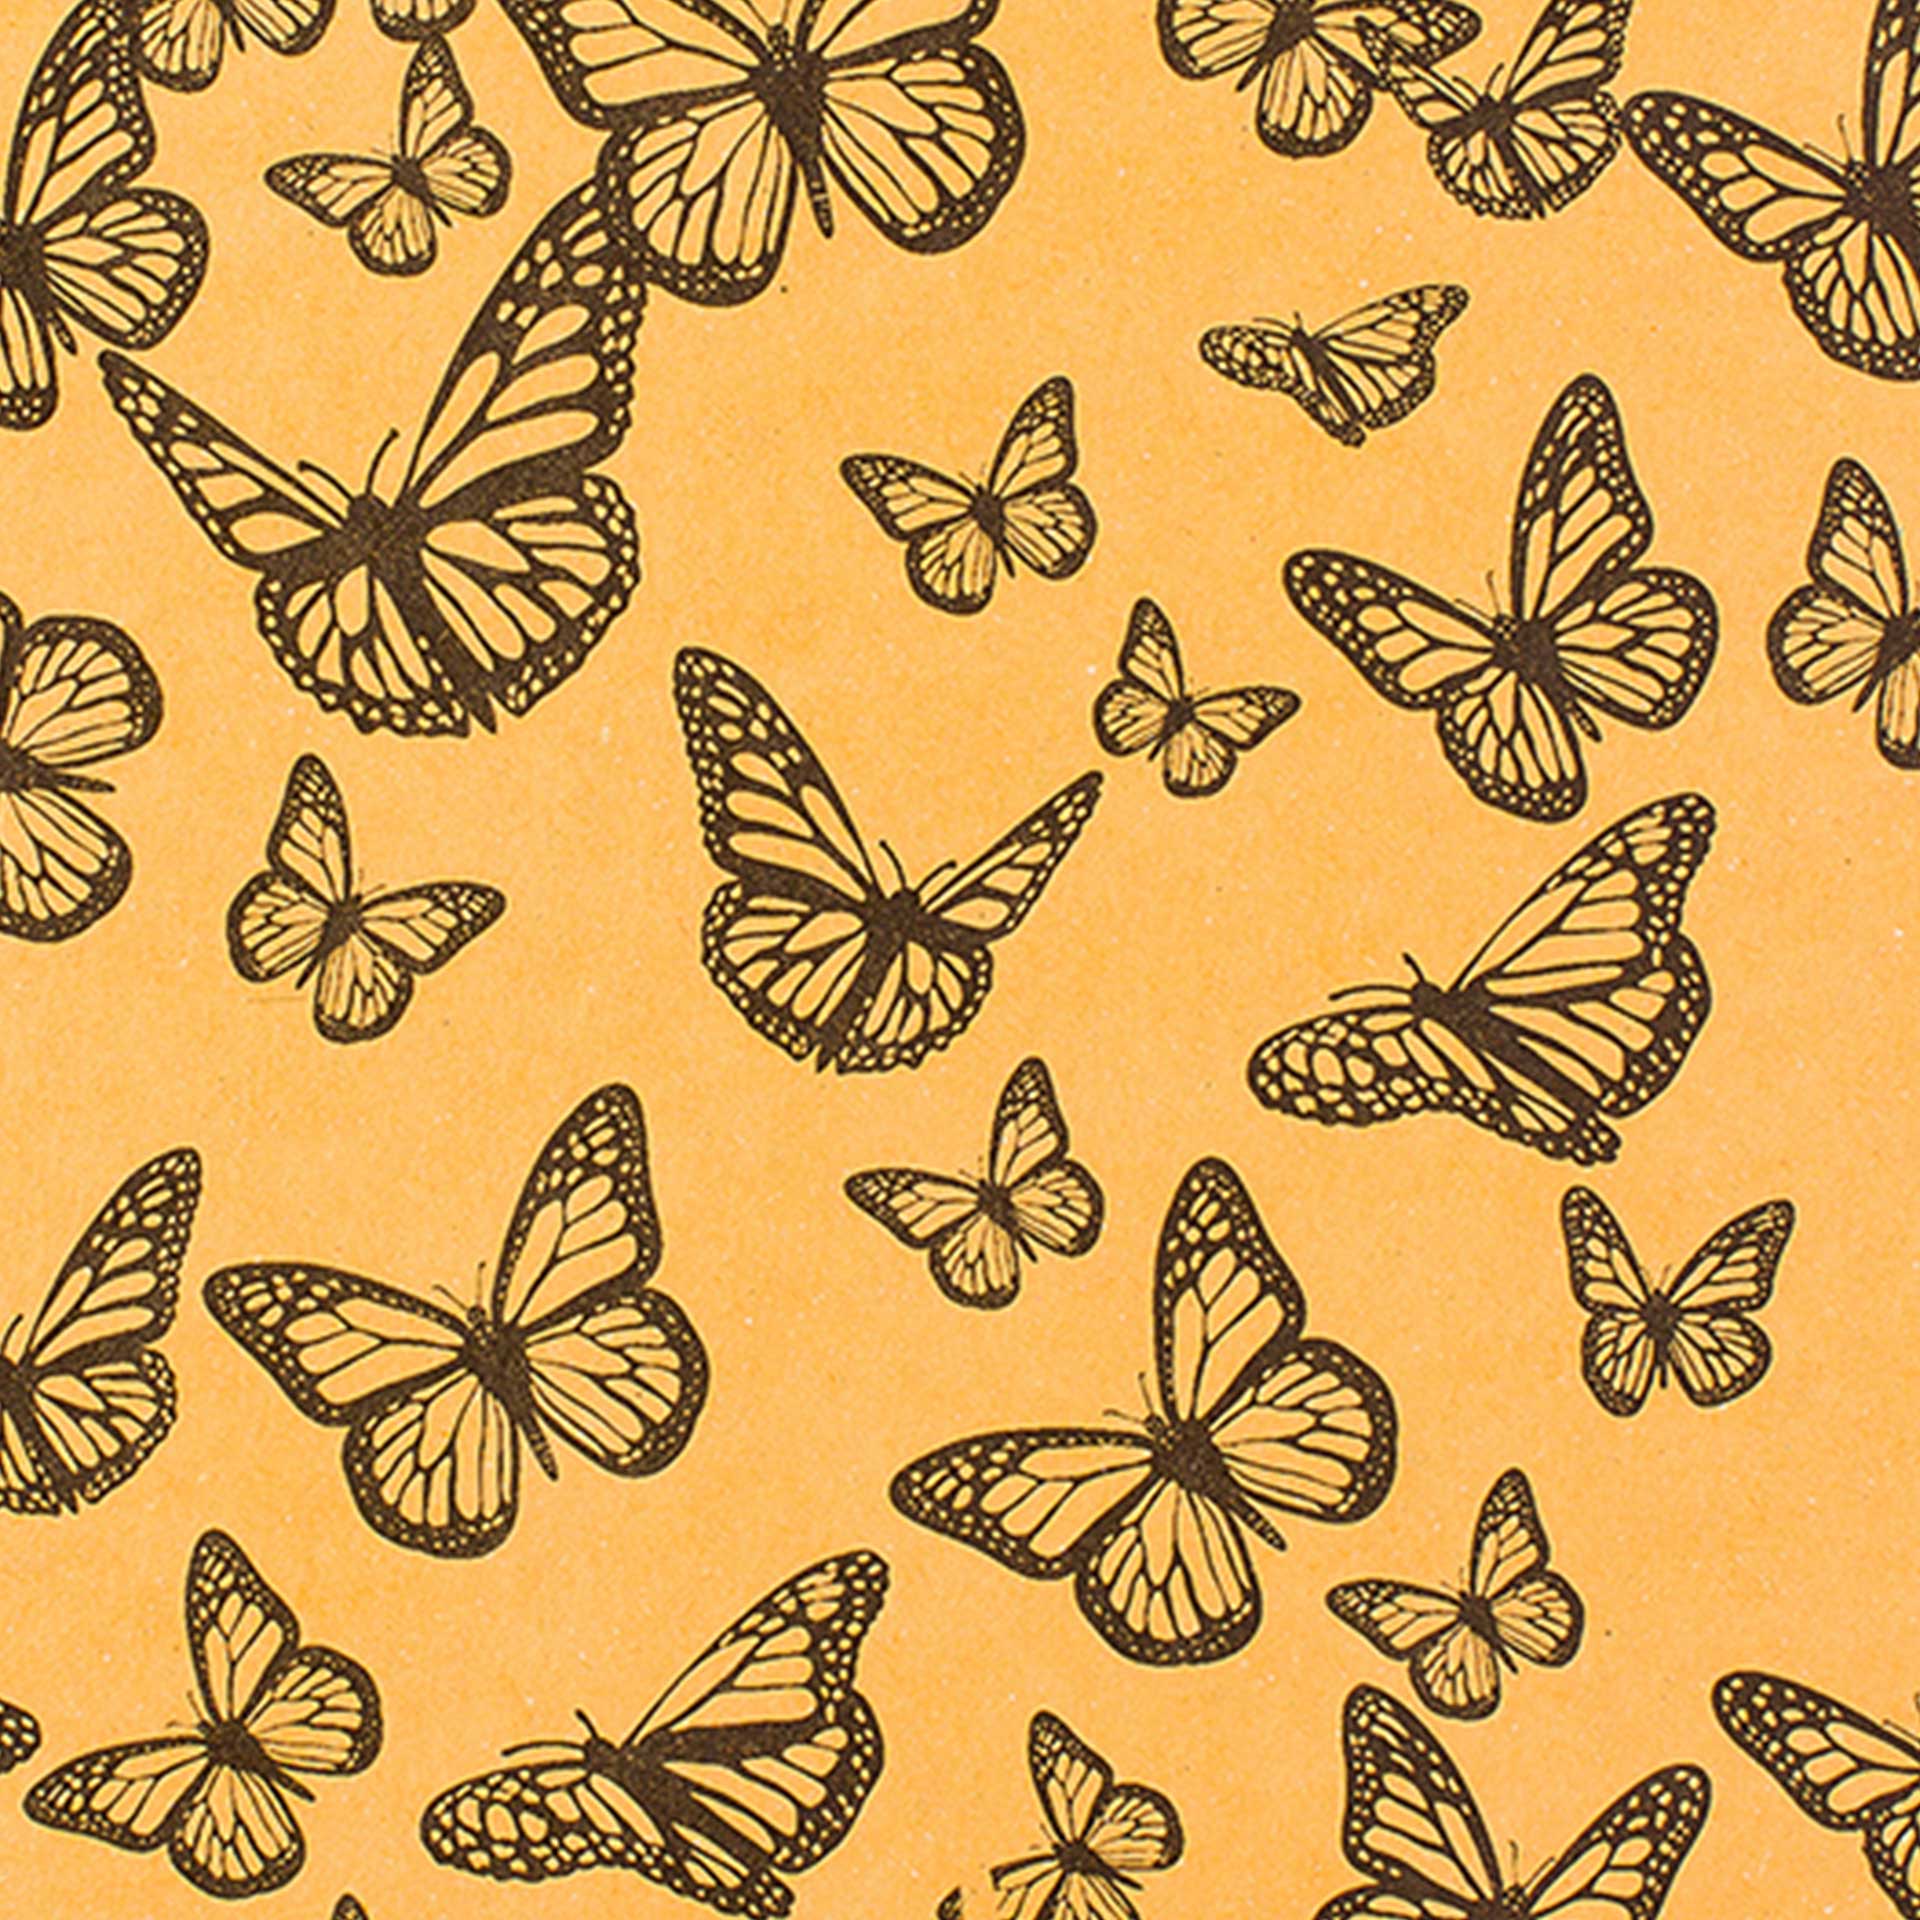 Closeup of butterflies printed in black and yellow